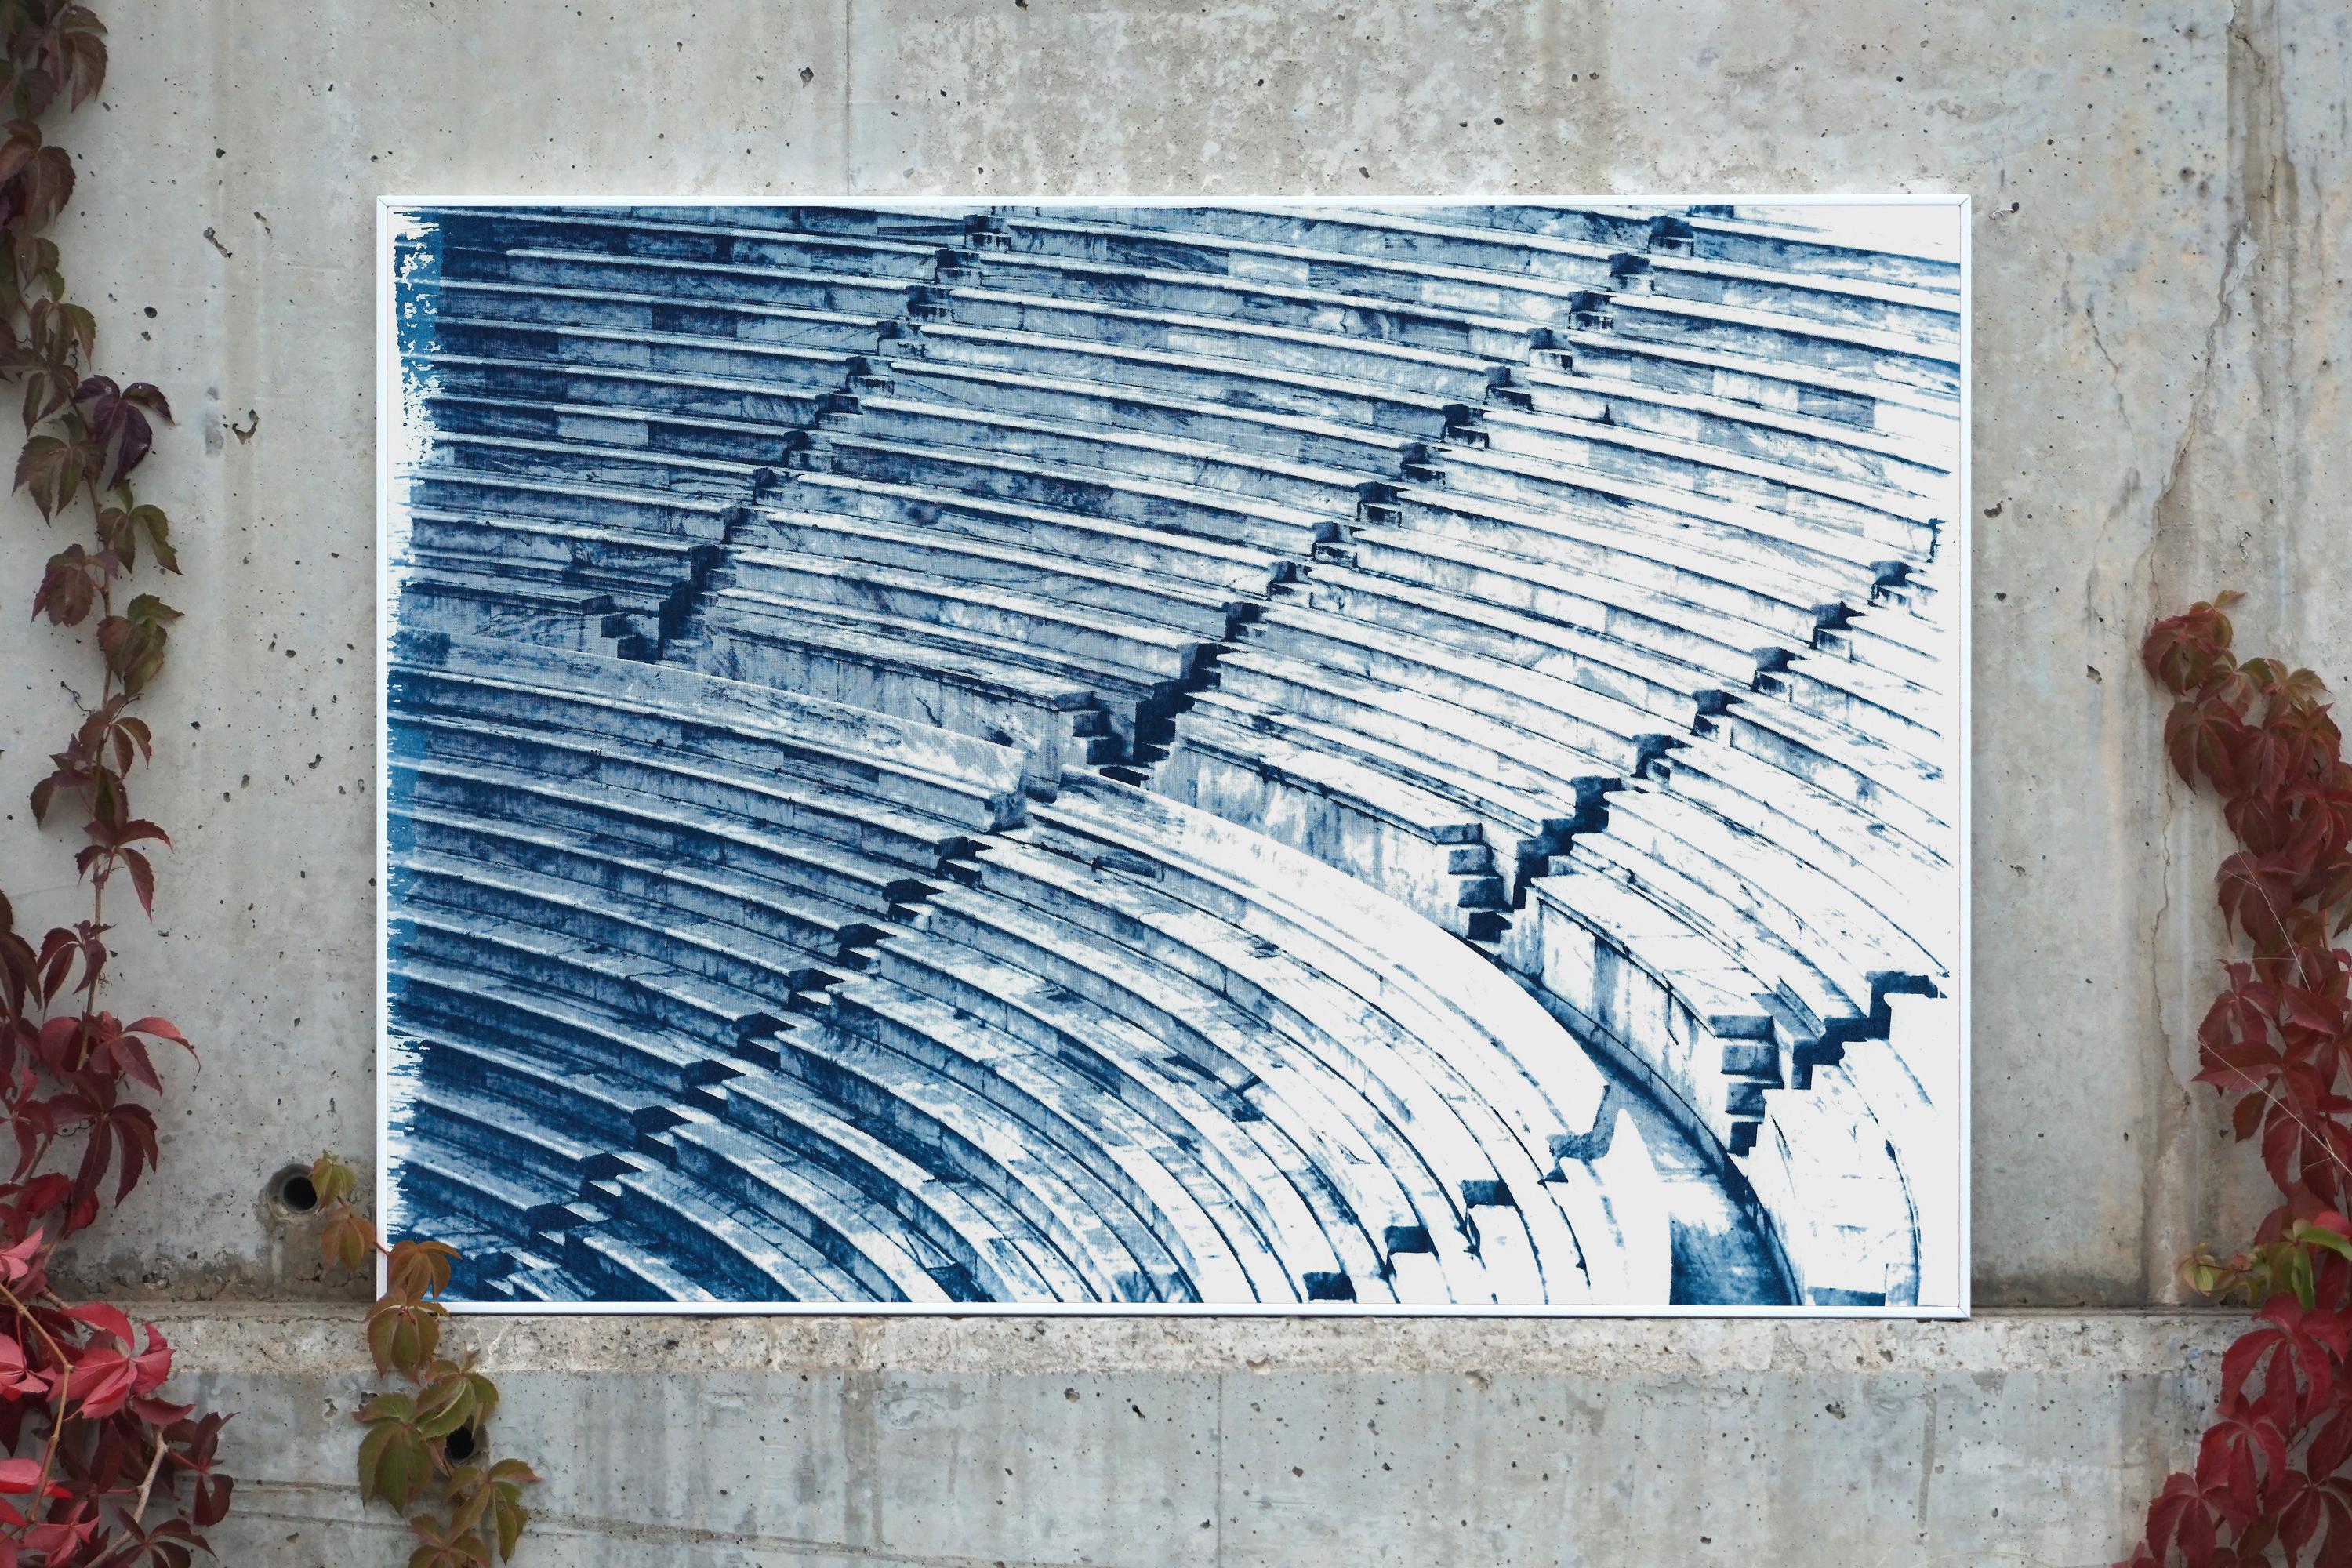 Diptych of Ancient Theatres, Handmade Cyanotype, Greek and Roman Architecture - Blue Landscape Print by Kind of Cyan